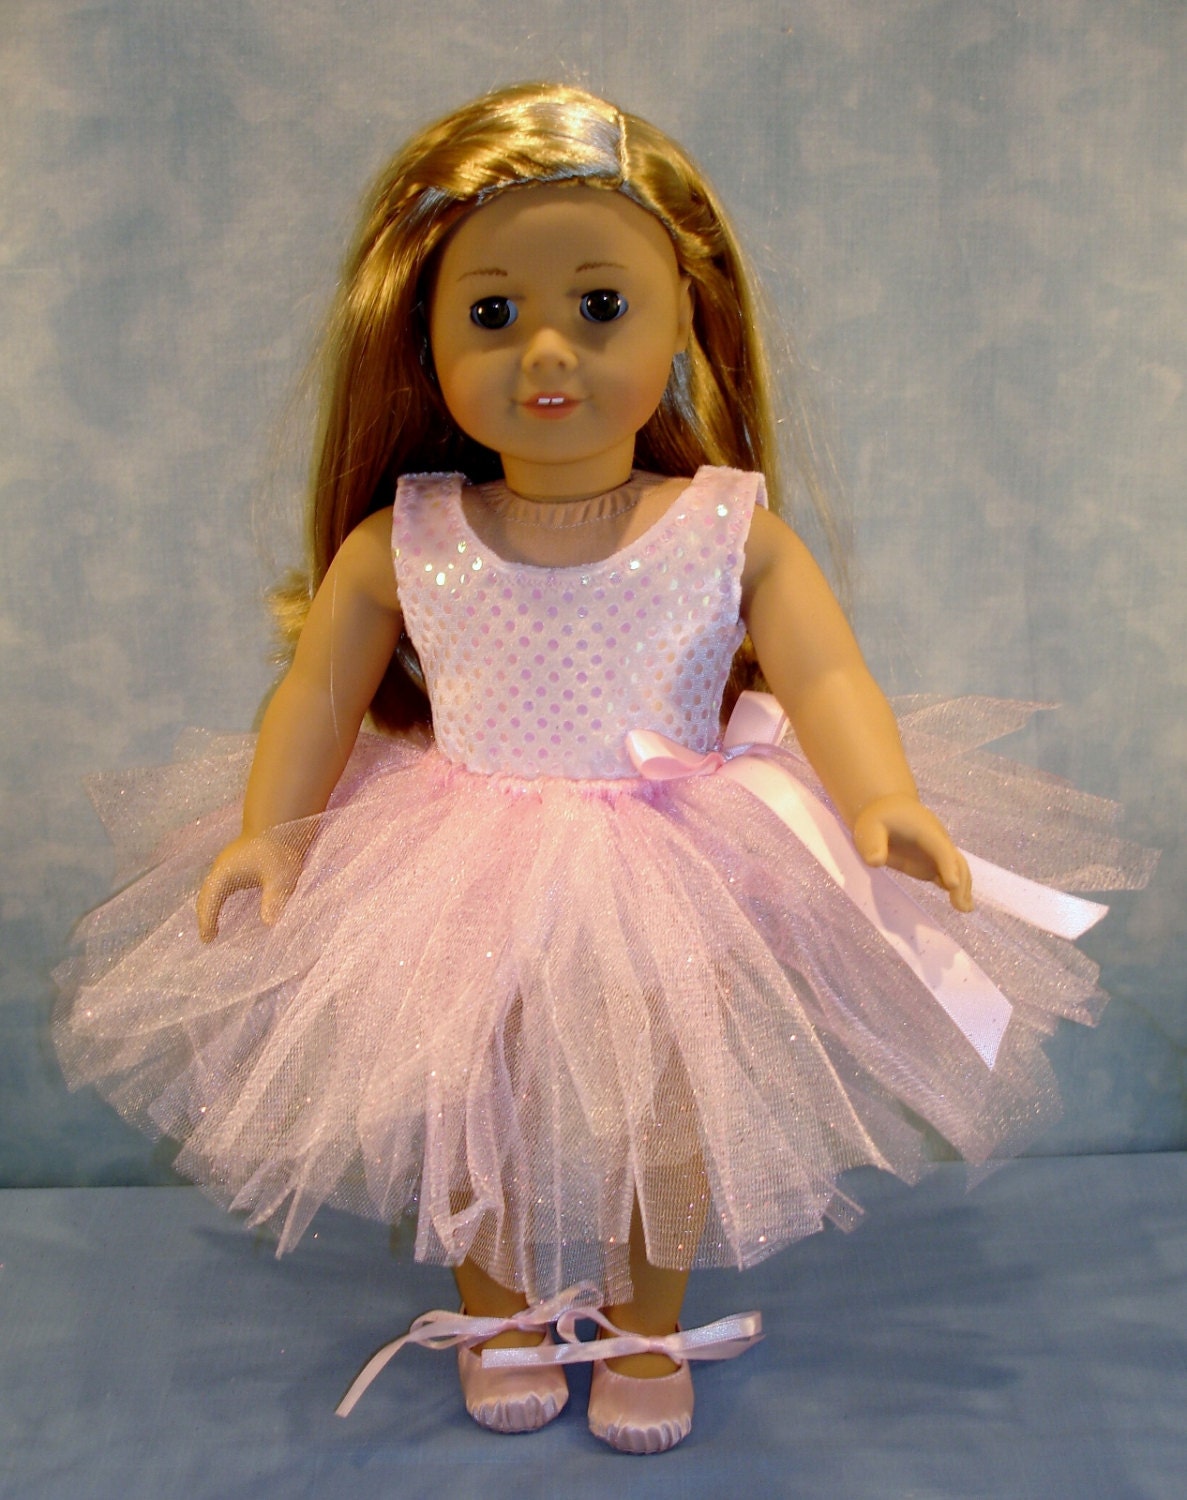 Pink Tutu Outfit for 18 inch dolls